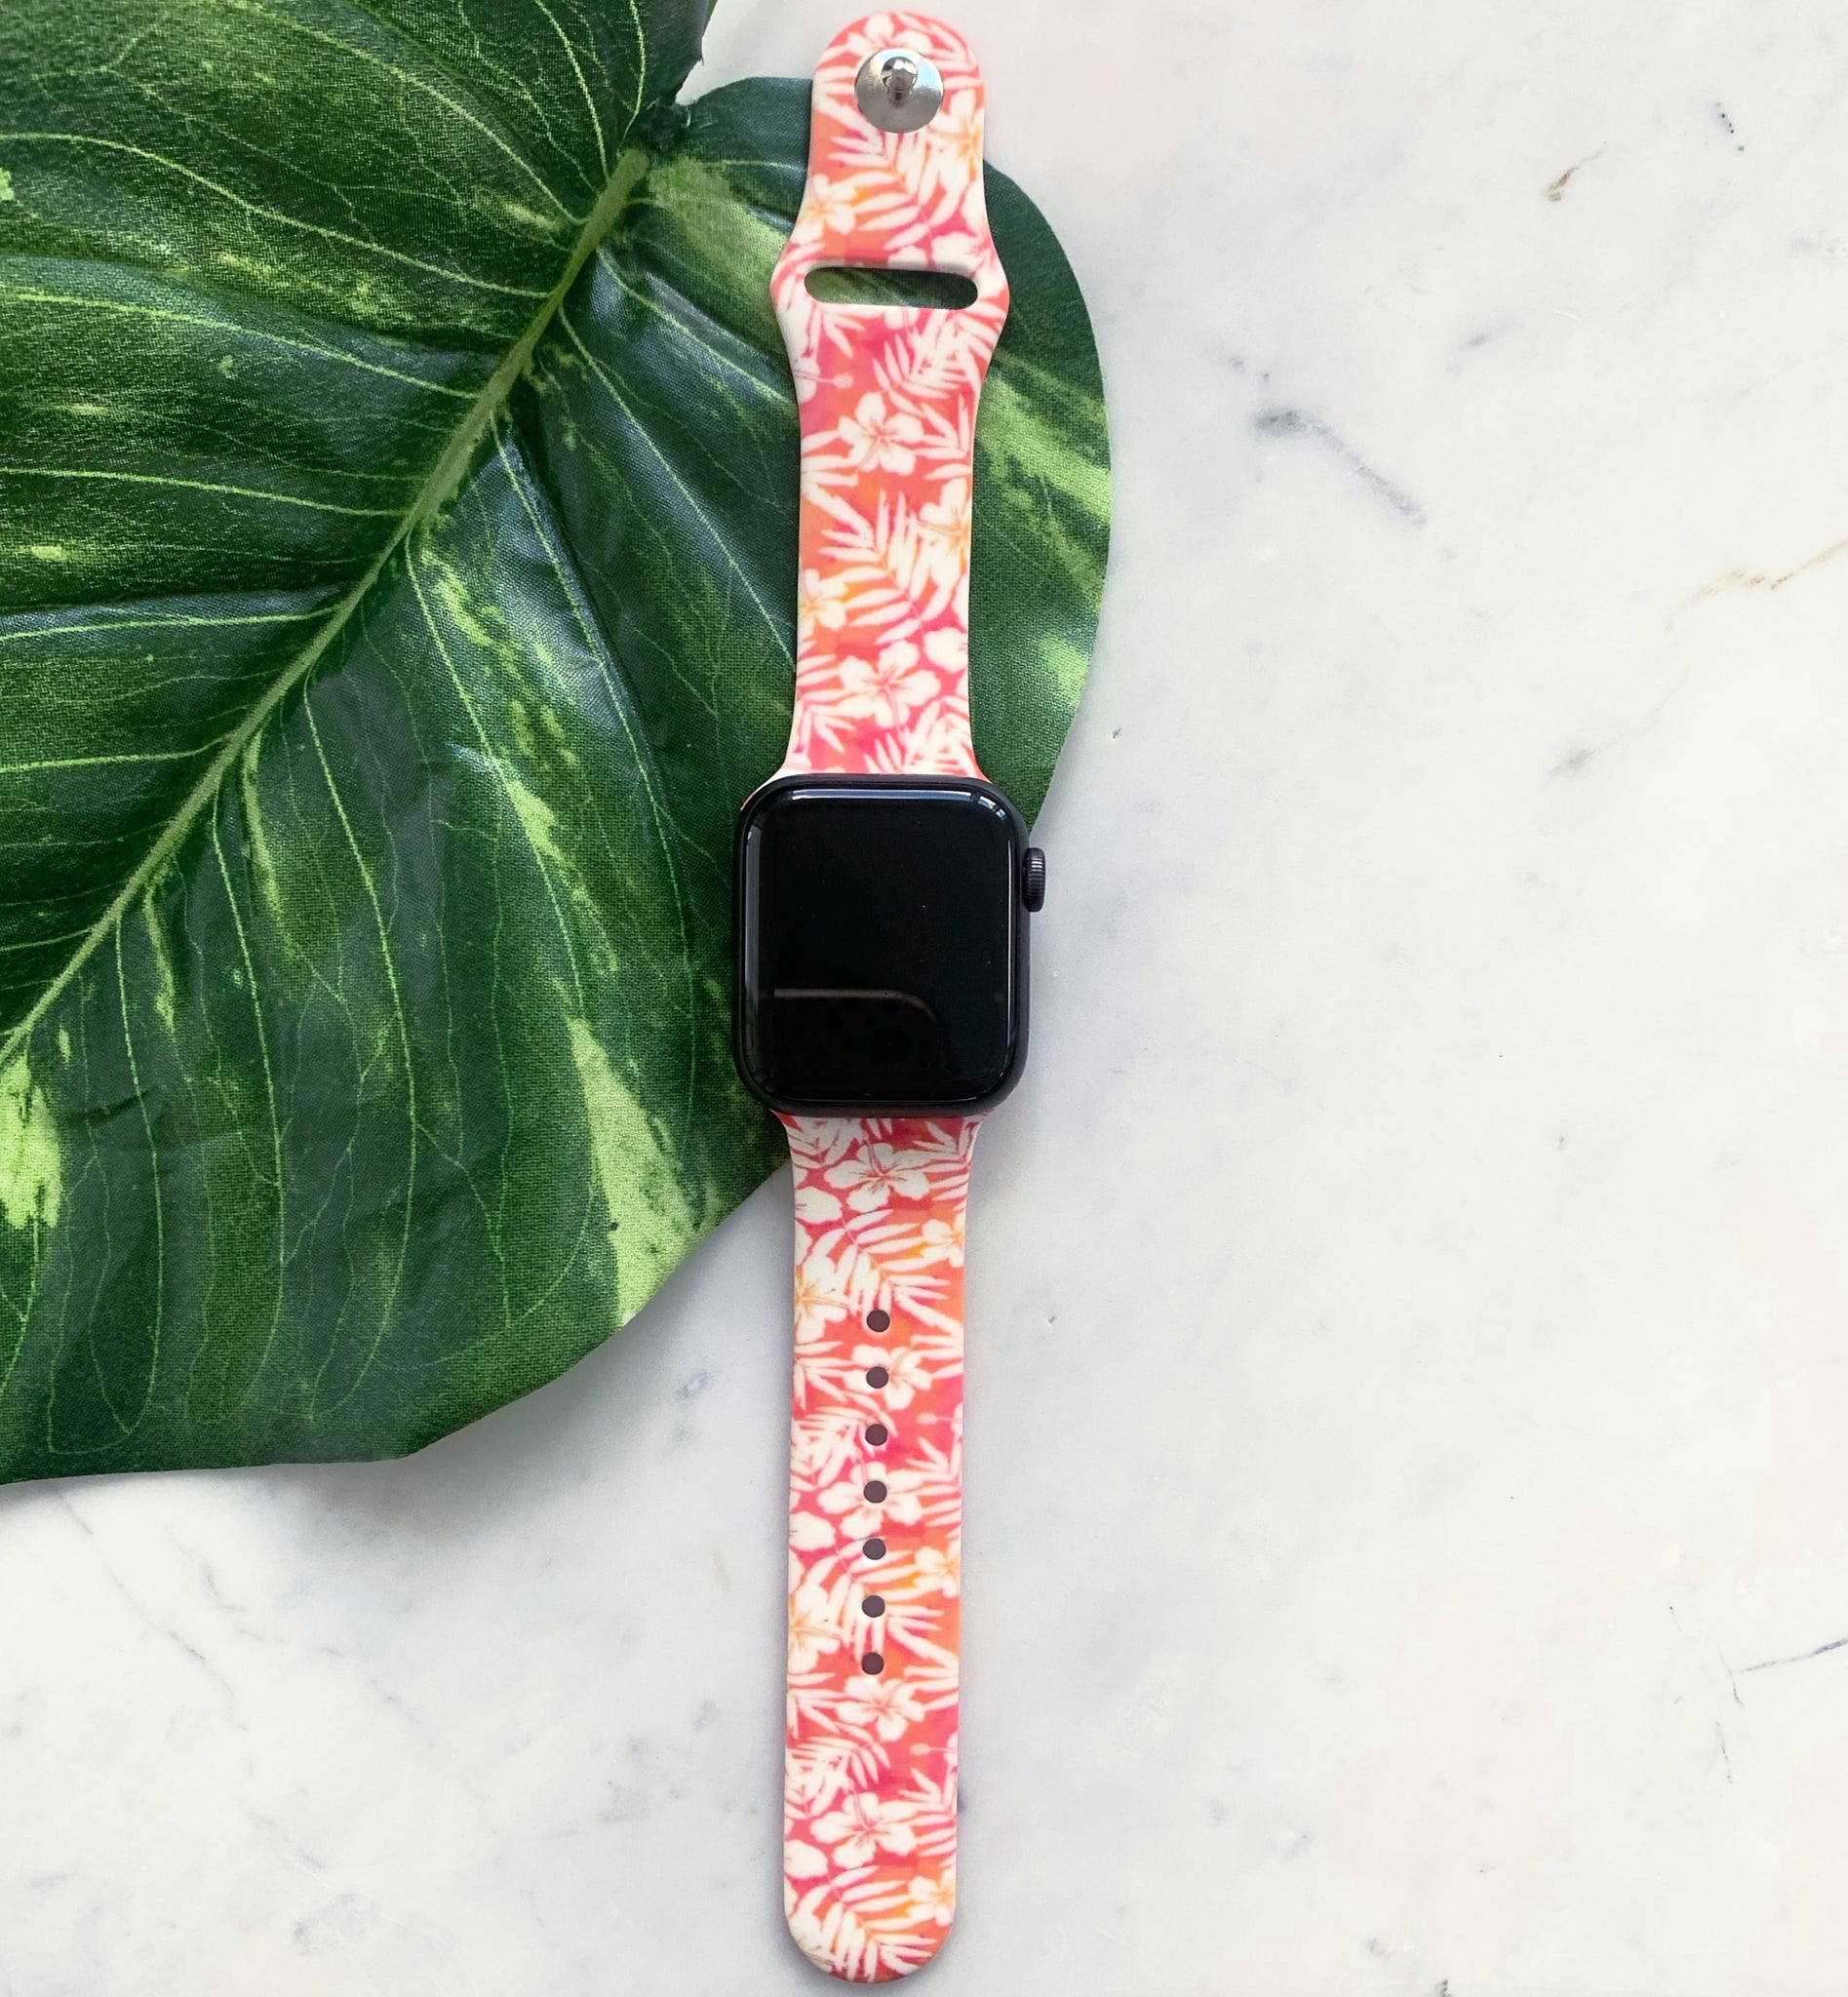 Patterned Apple Watch Bands & Patterned Straps